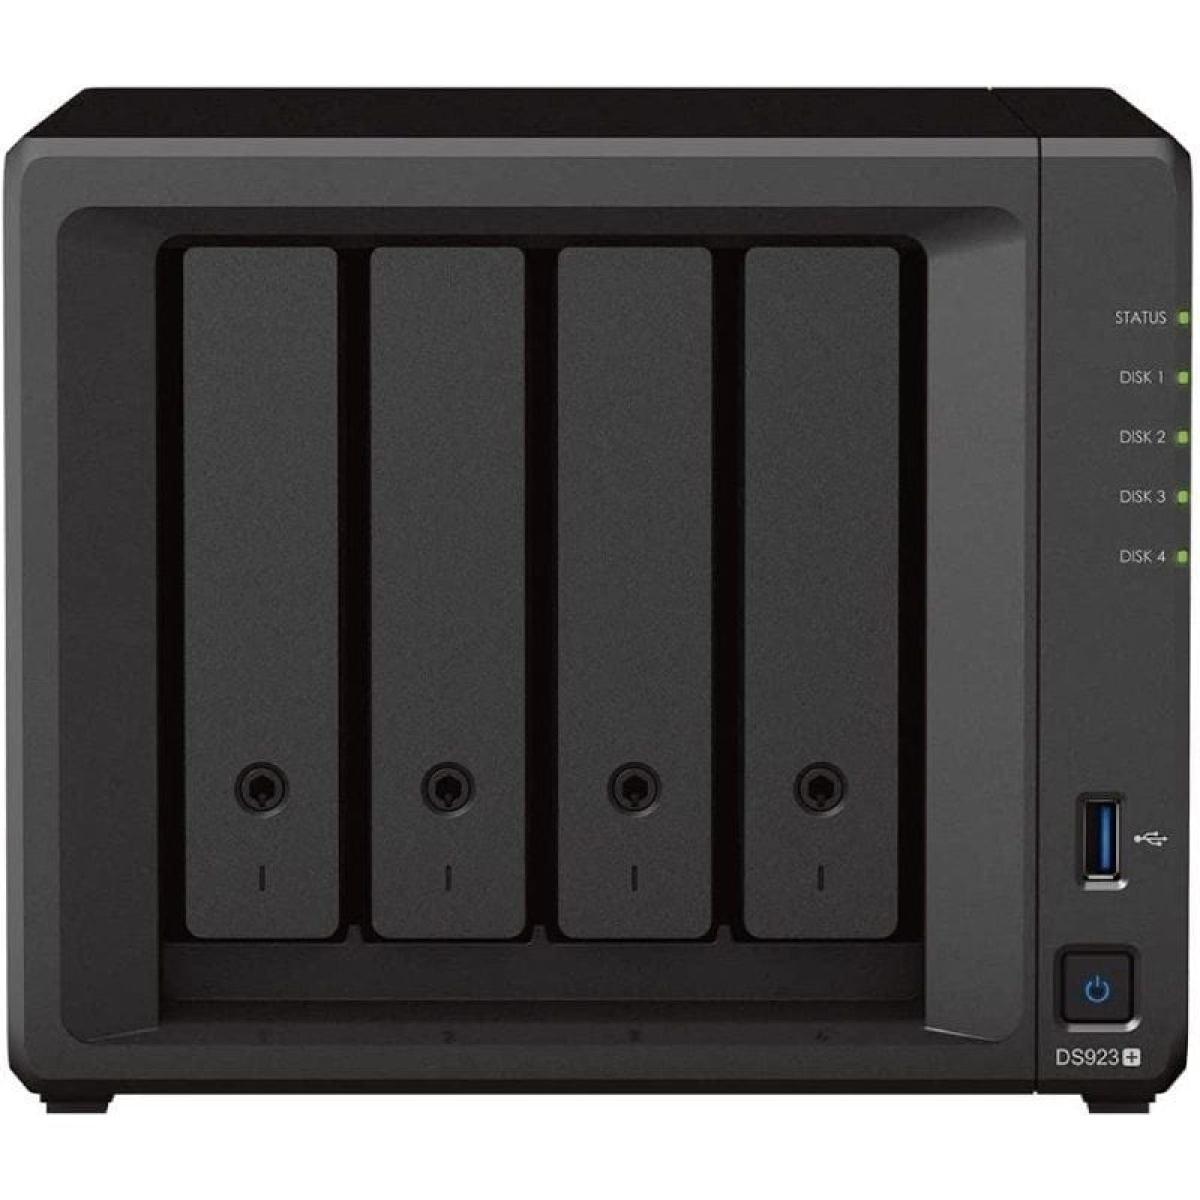 NAS SYNOLOGY DISKSTATION DS923+/ 4 BAHIAS 3.5"- 2.5"/ 4GB DDR4/ FORMATO TORRE